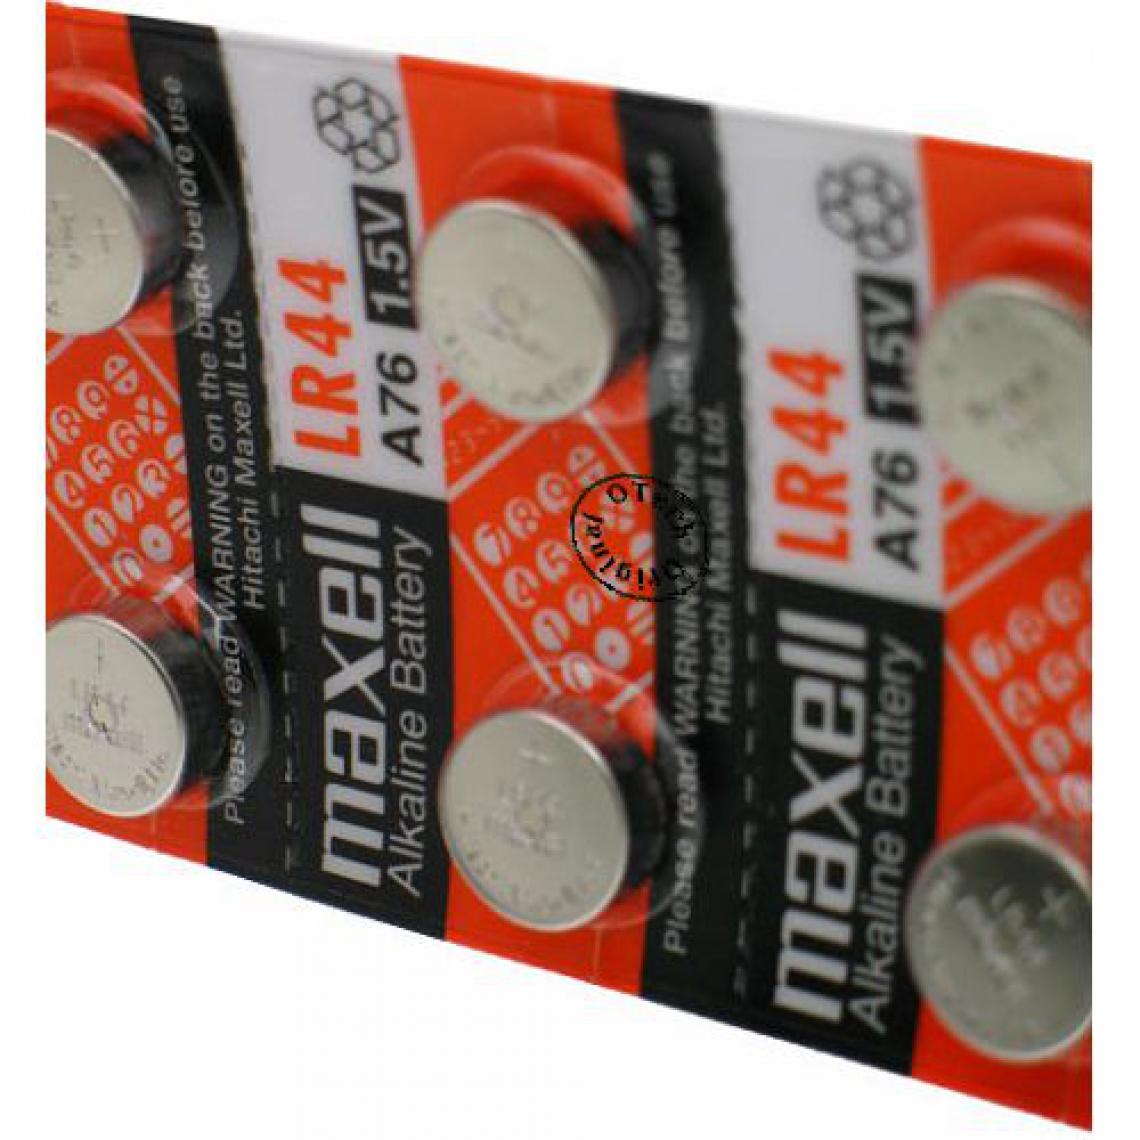 Otech - Pack de 10 piles maxell pour MAXELL CA18 - Piles rechargeables